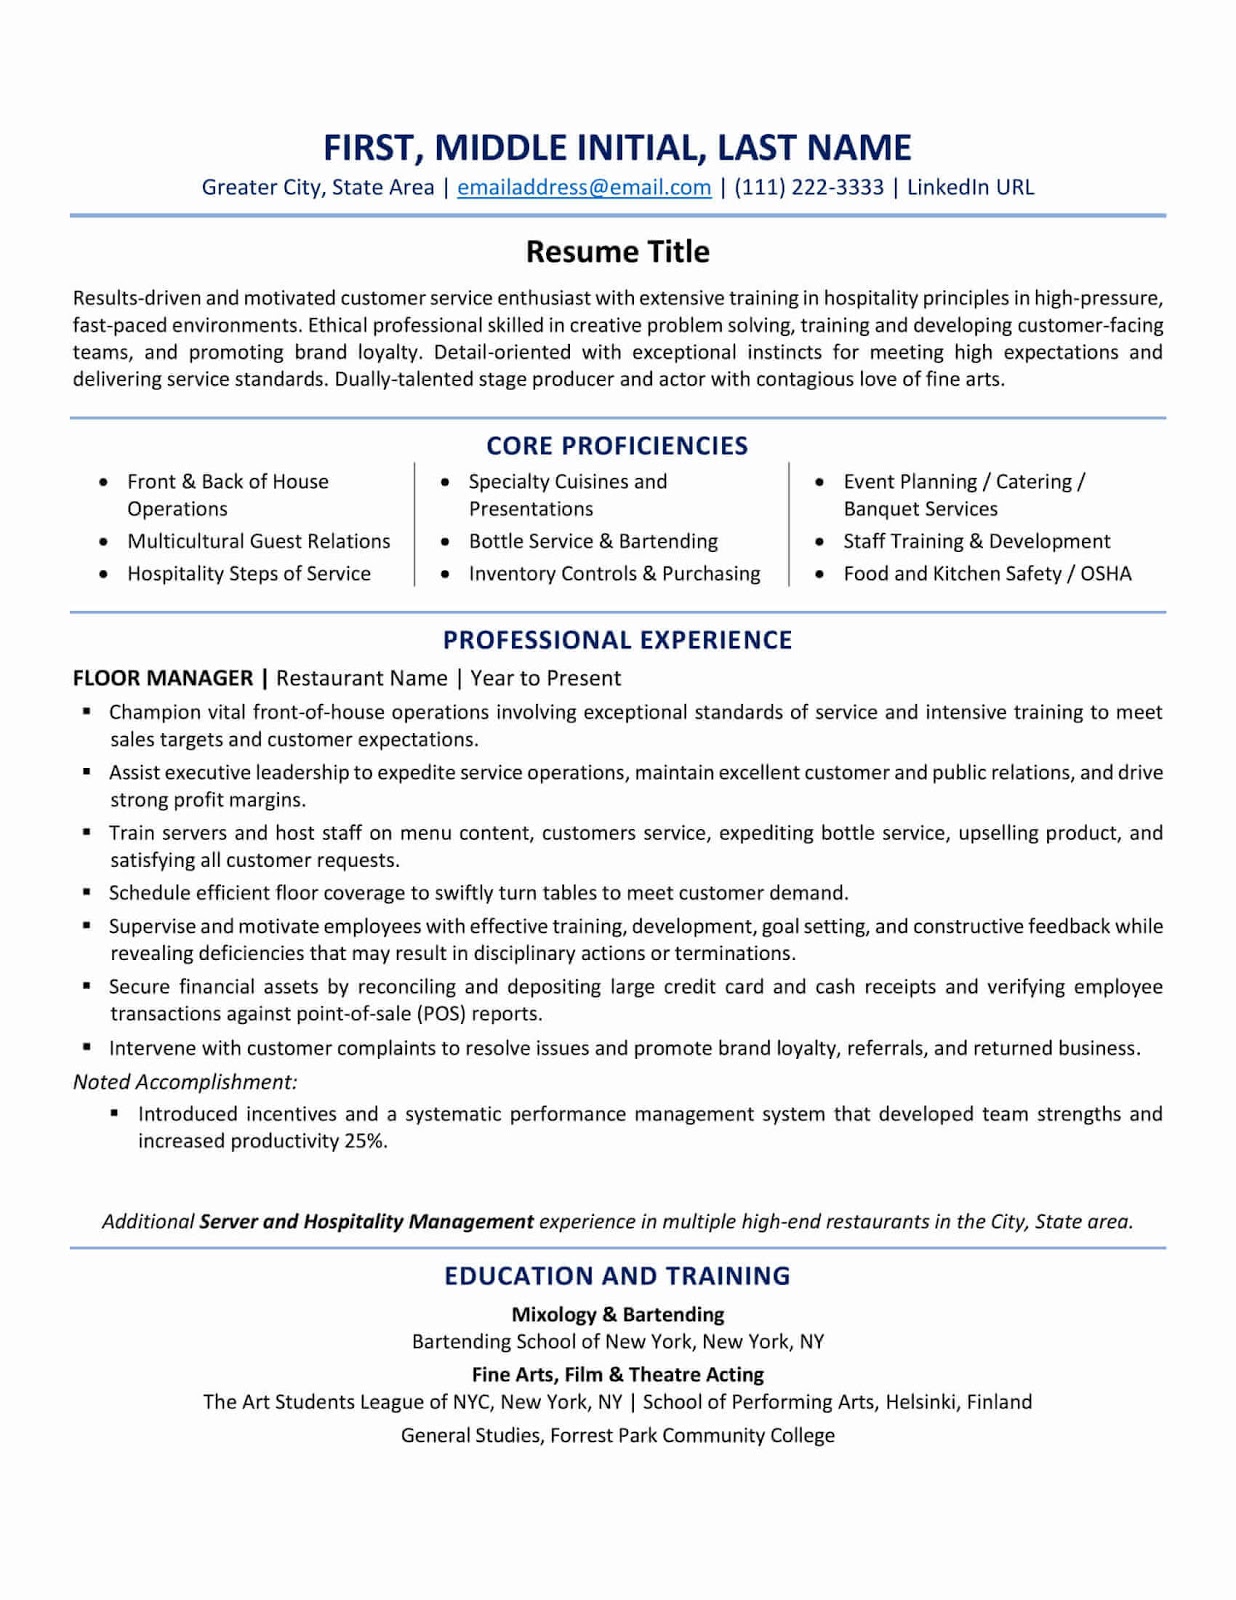 USA Resume Format: Best Tips and Examples (Updated)  ZipJob